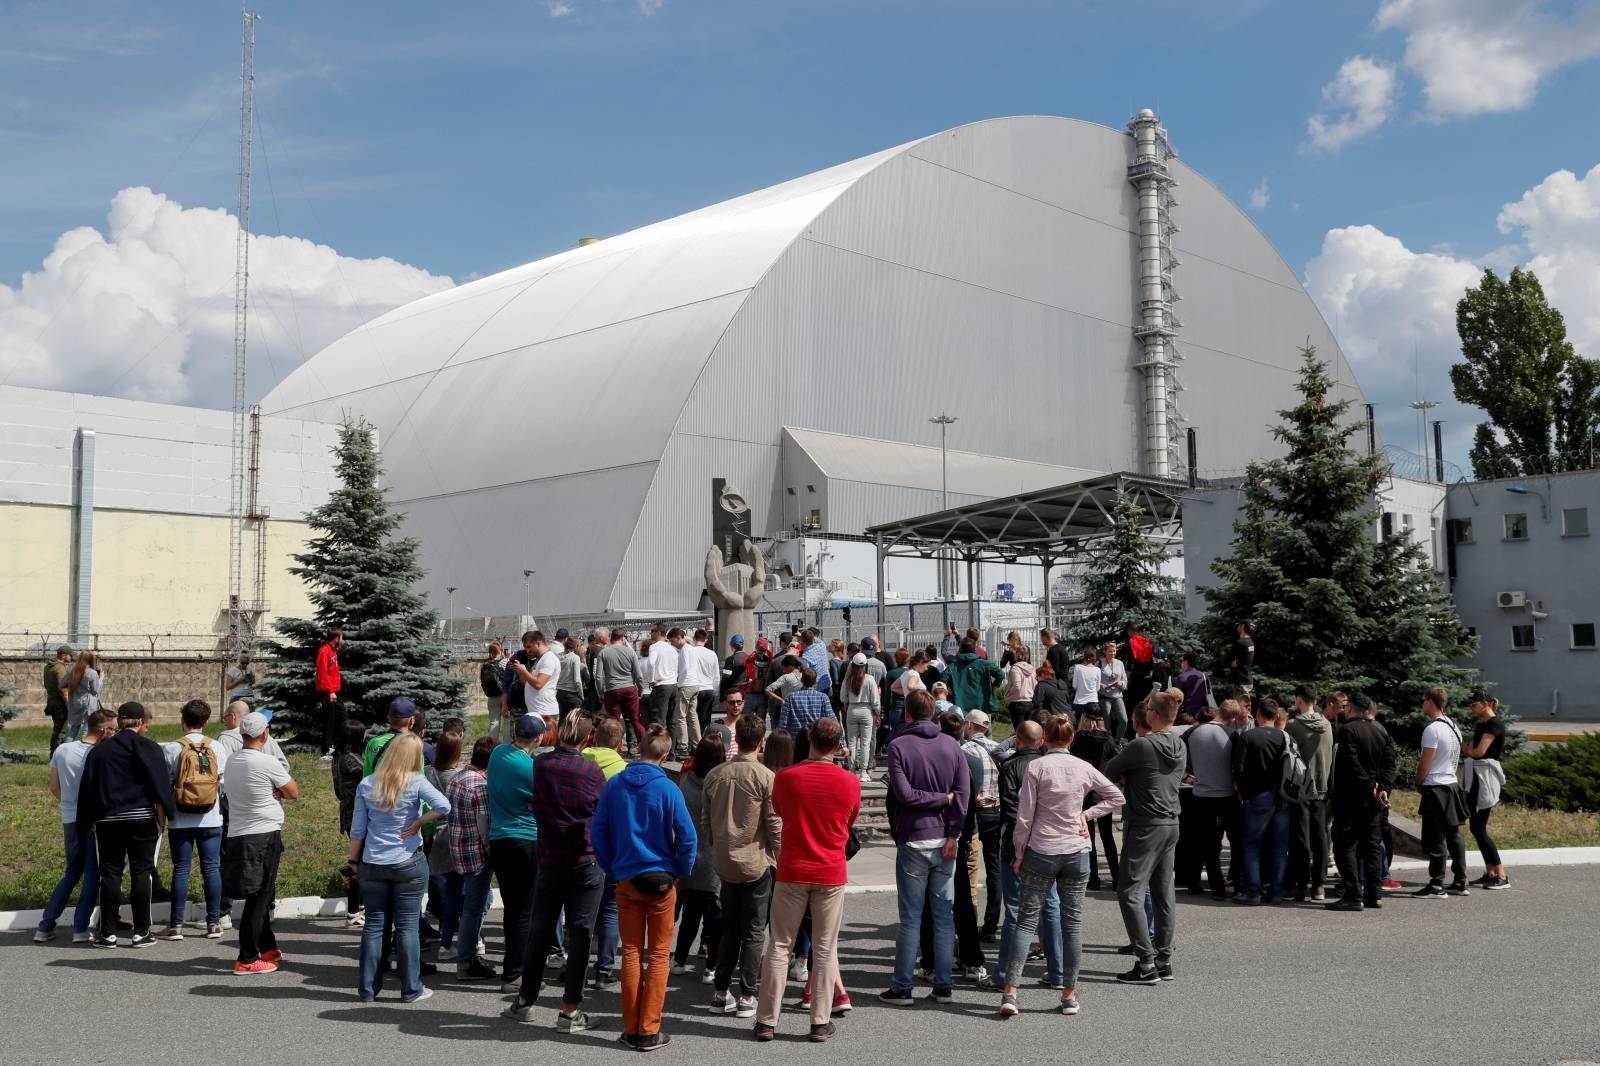 Visitors stand outside the New Safe Confinement (NSC) structure over the old sarcophagus covering the damaged fourth reactor at the Chernobyl Nuclear Power Plant, in Chernobyl